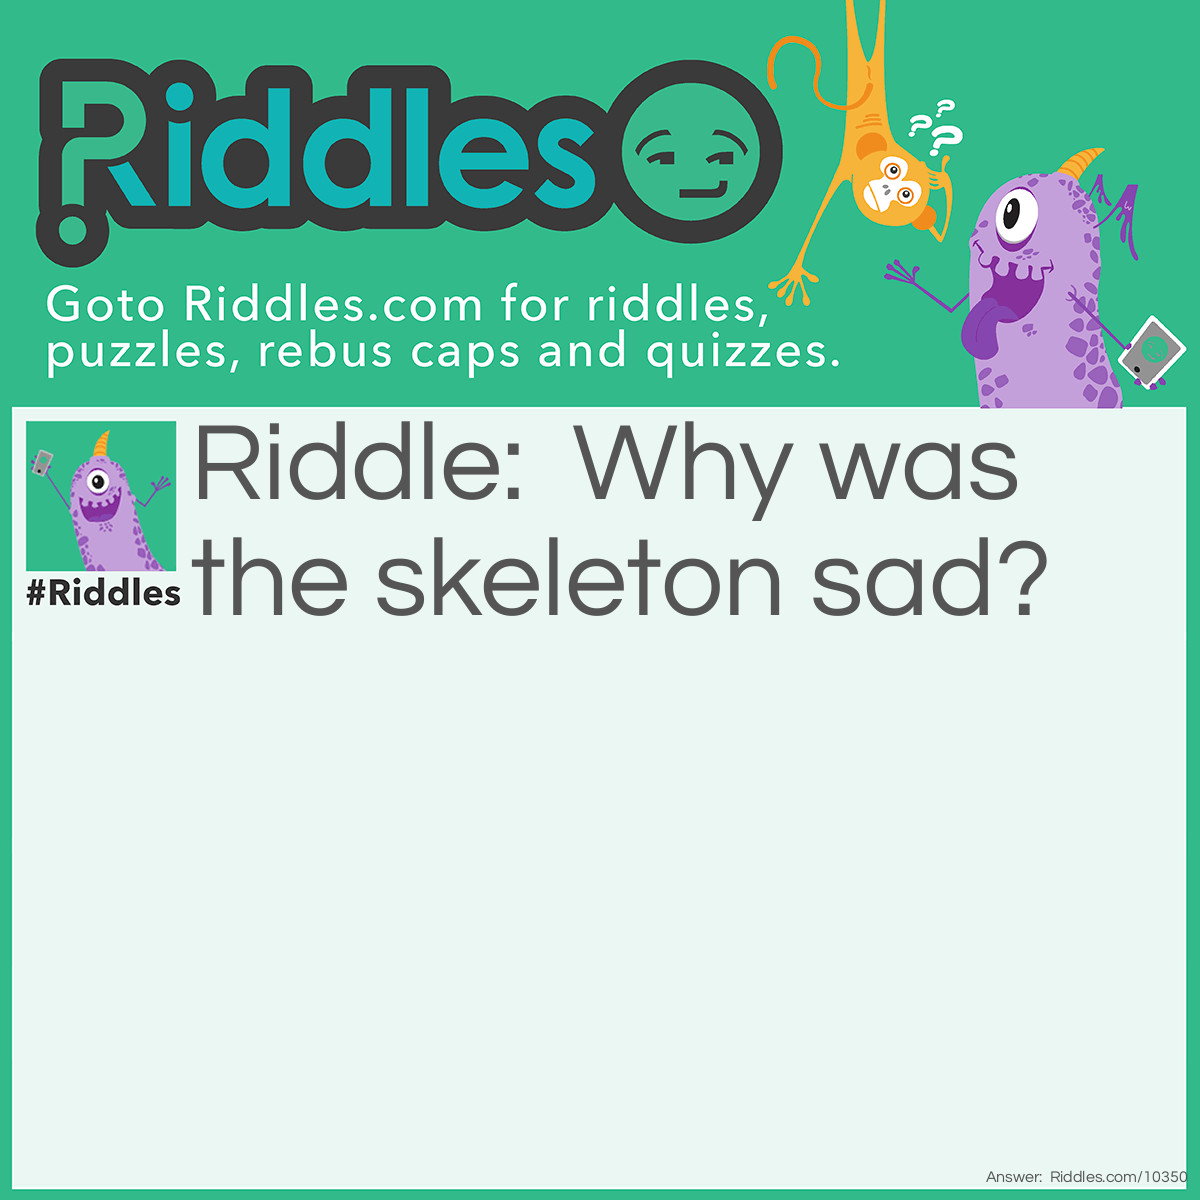 Riddle: Why was the skeleton sad? Answer: Because he had nothing to craft with.